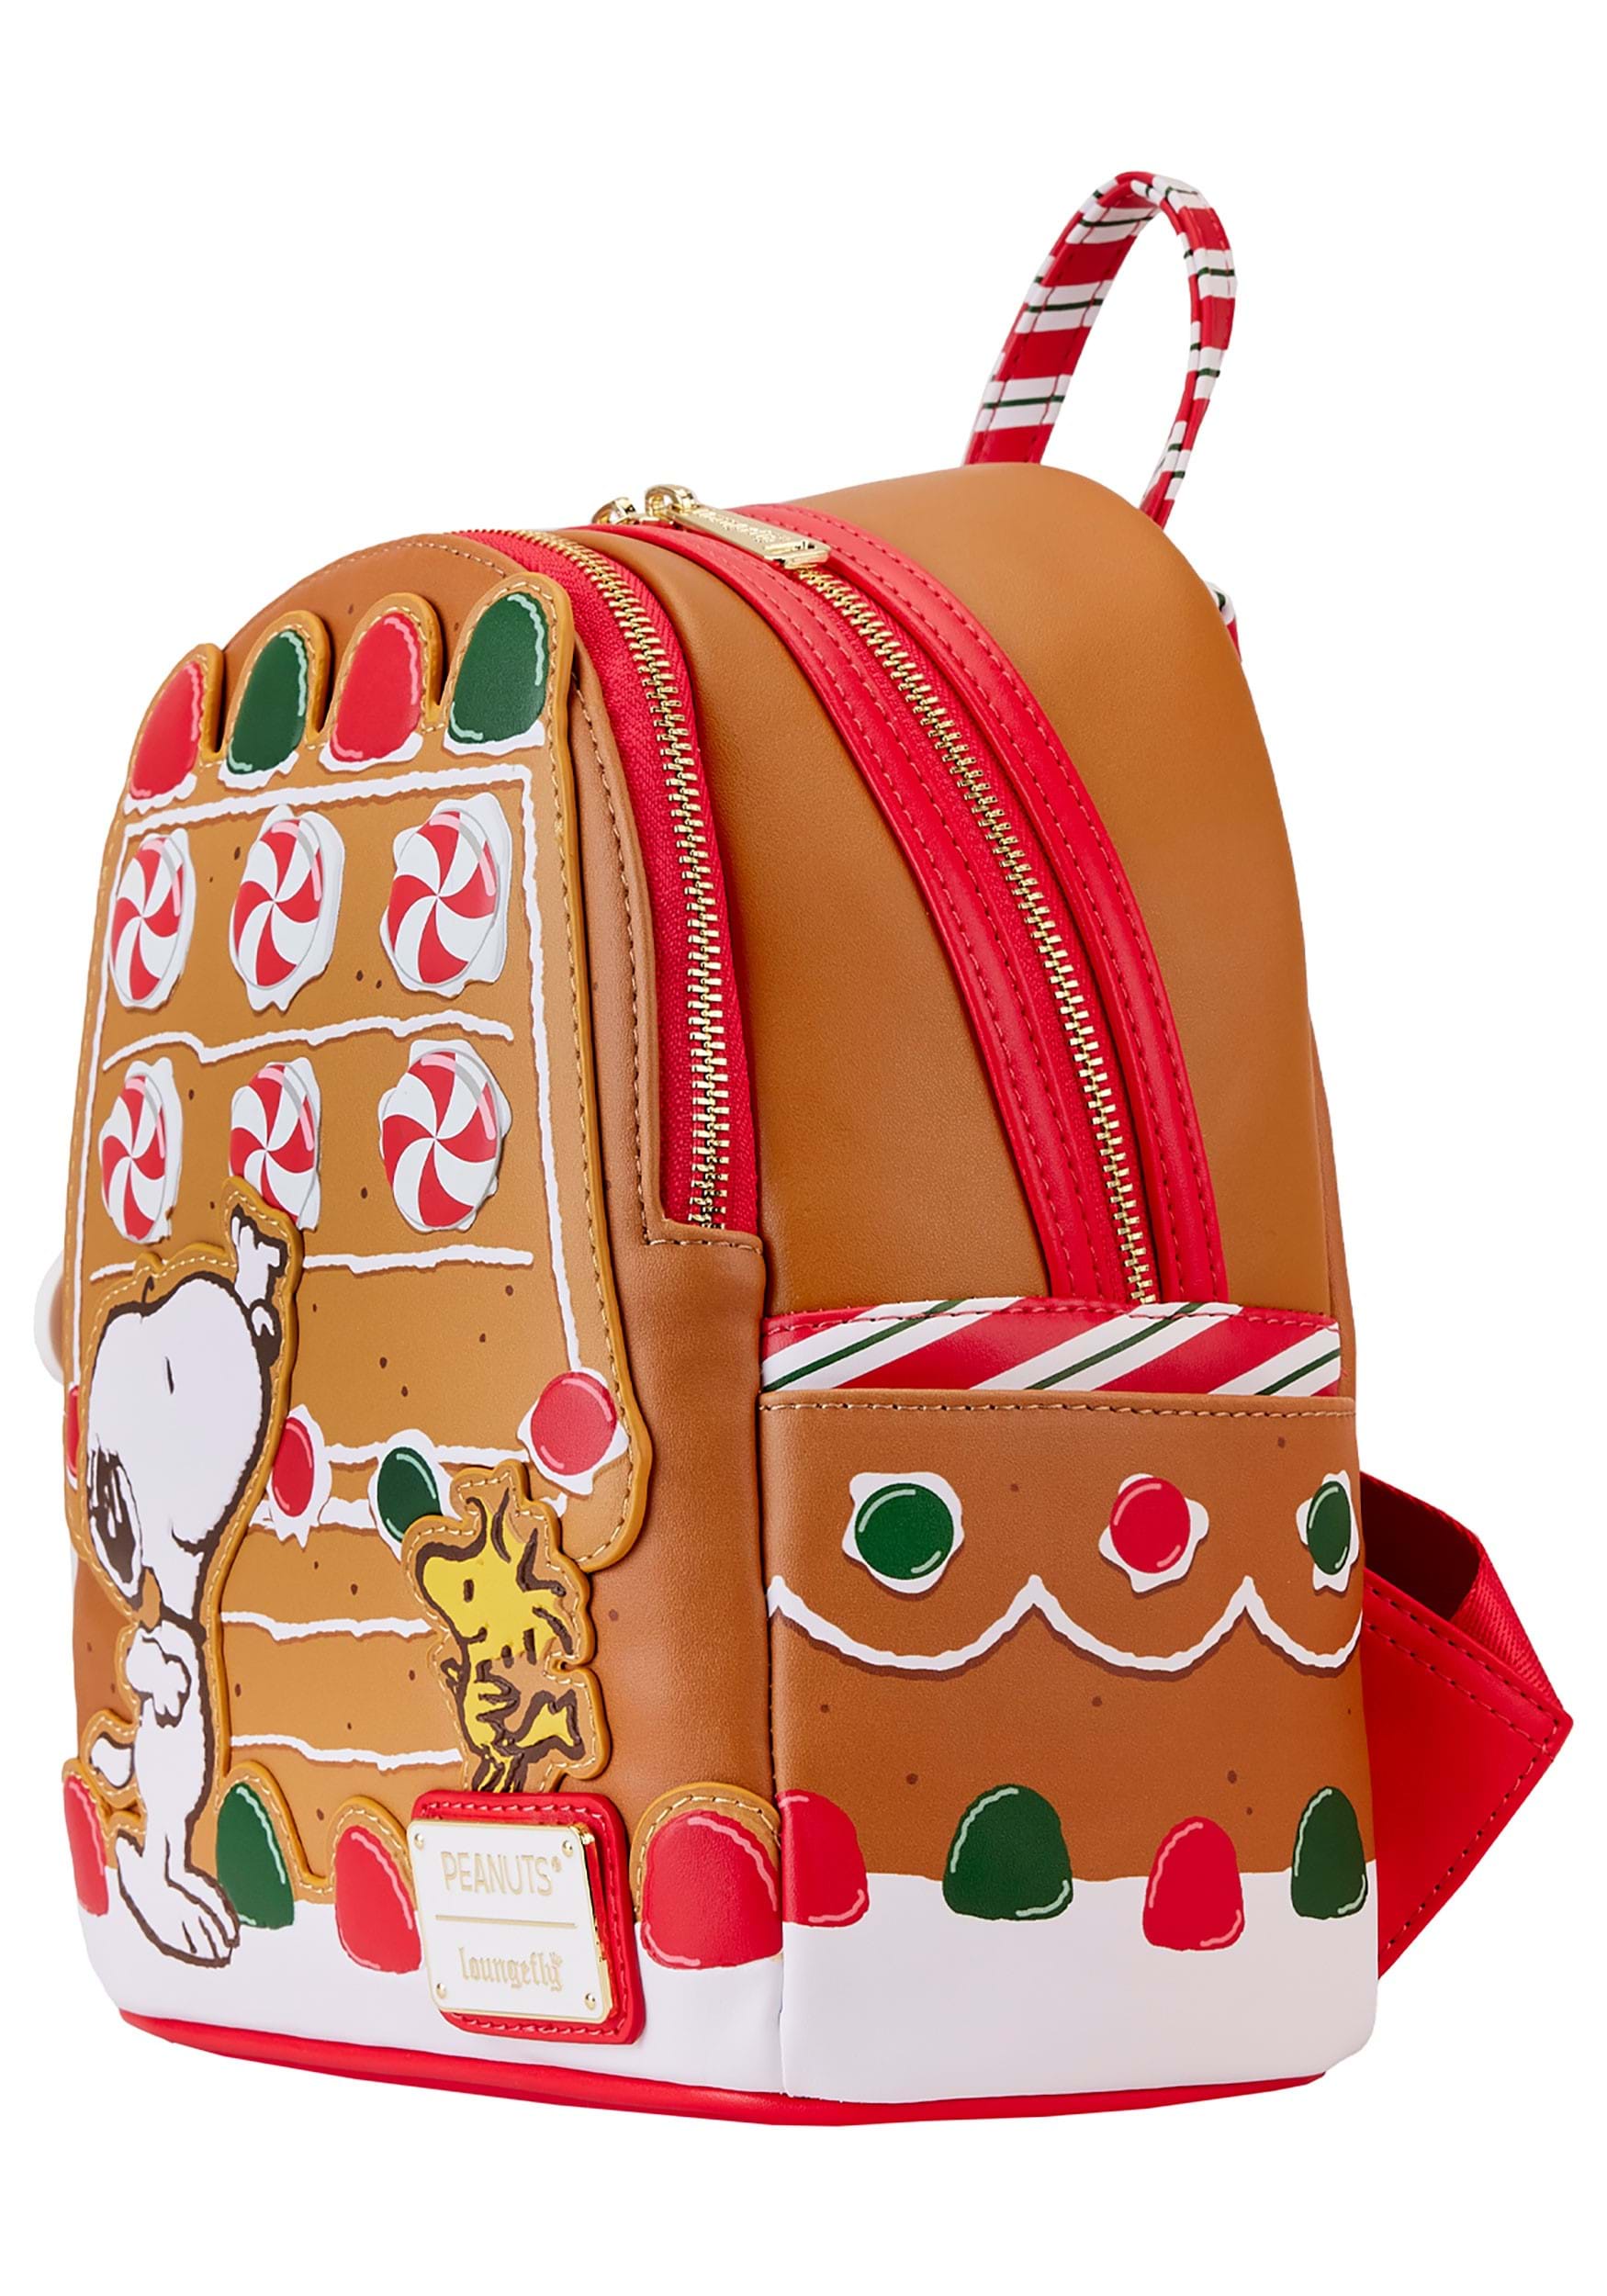 Peanuts Snoopy Gingerbread House Loungefly Mini Backpack , Loungefly Peanuts